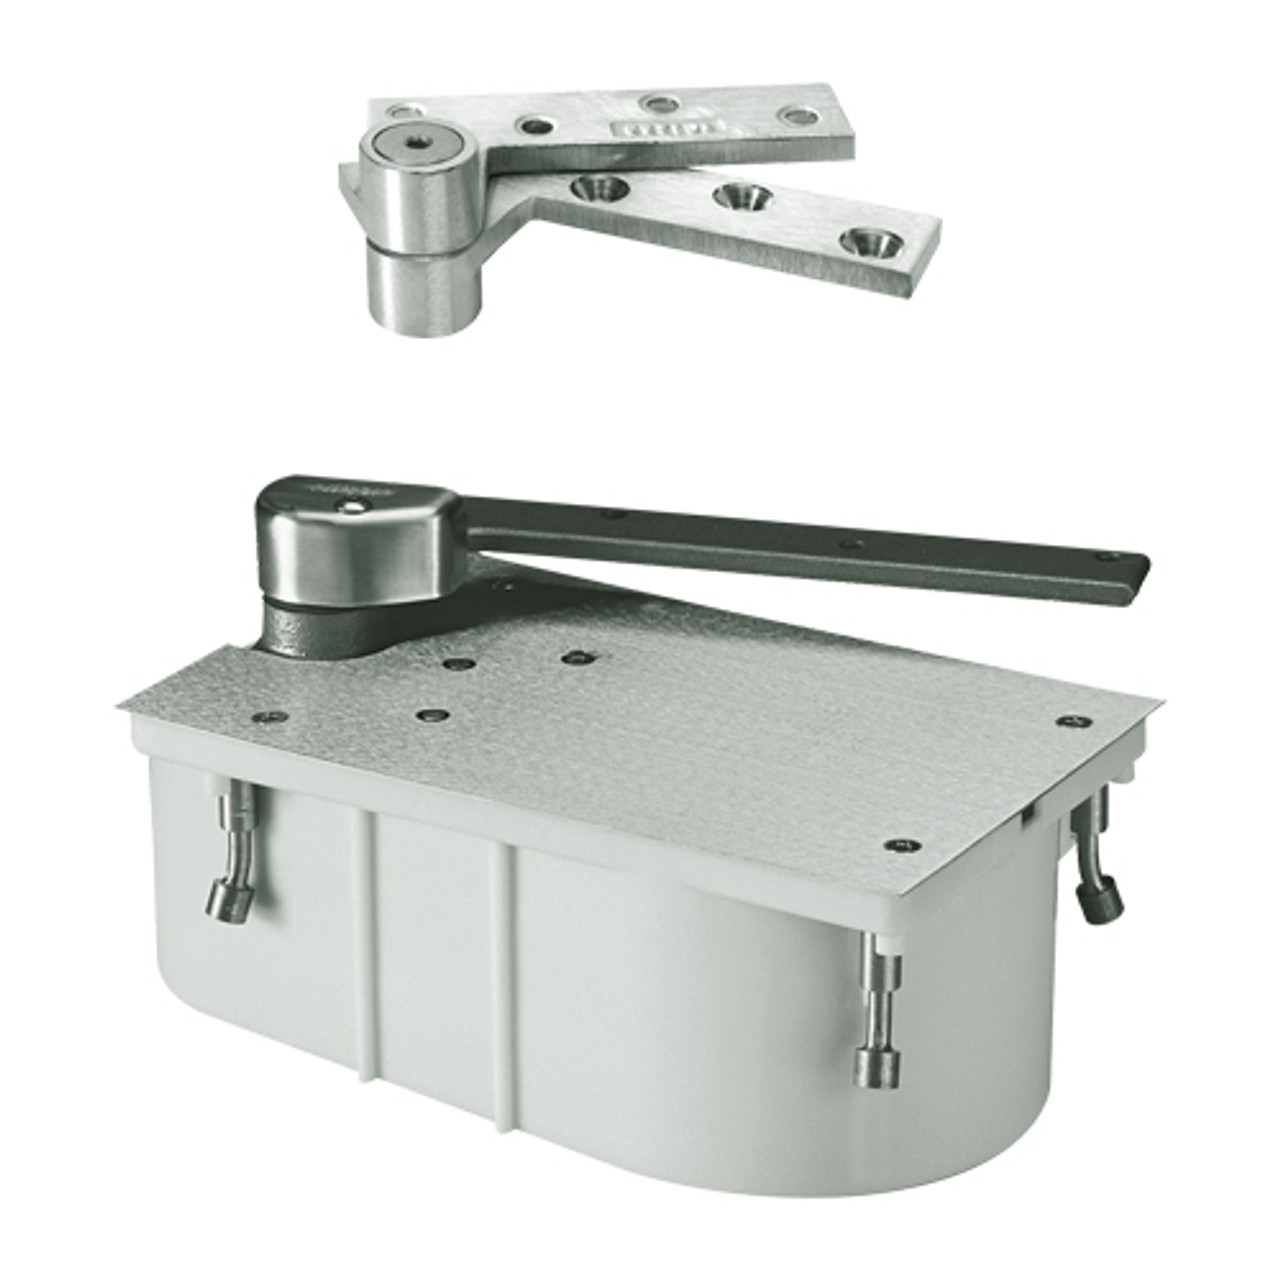 F27-105N-RH-619 Rixson 27 Series Fire Rated Heavy Duty 3/4" Offset Hung Floor Closer in Satin Nickel Finish